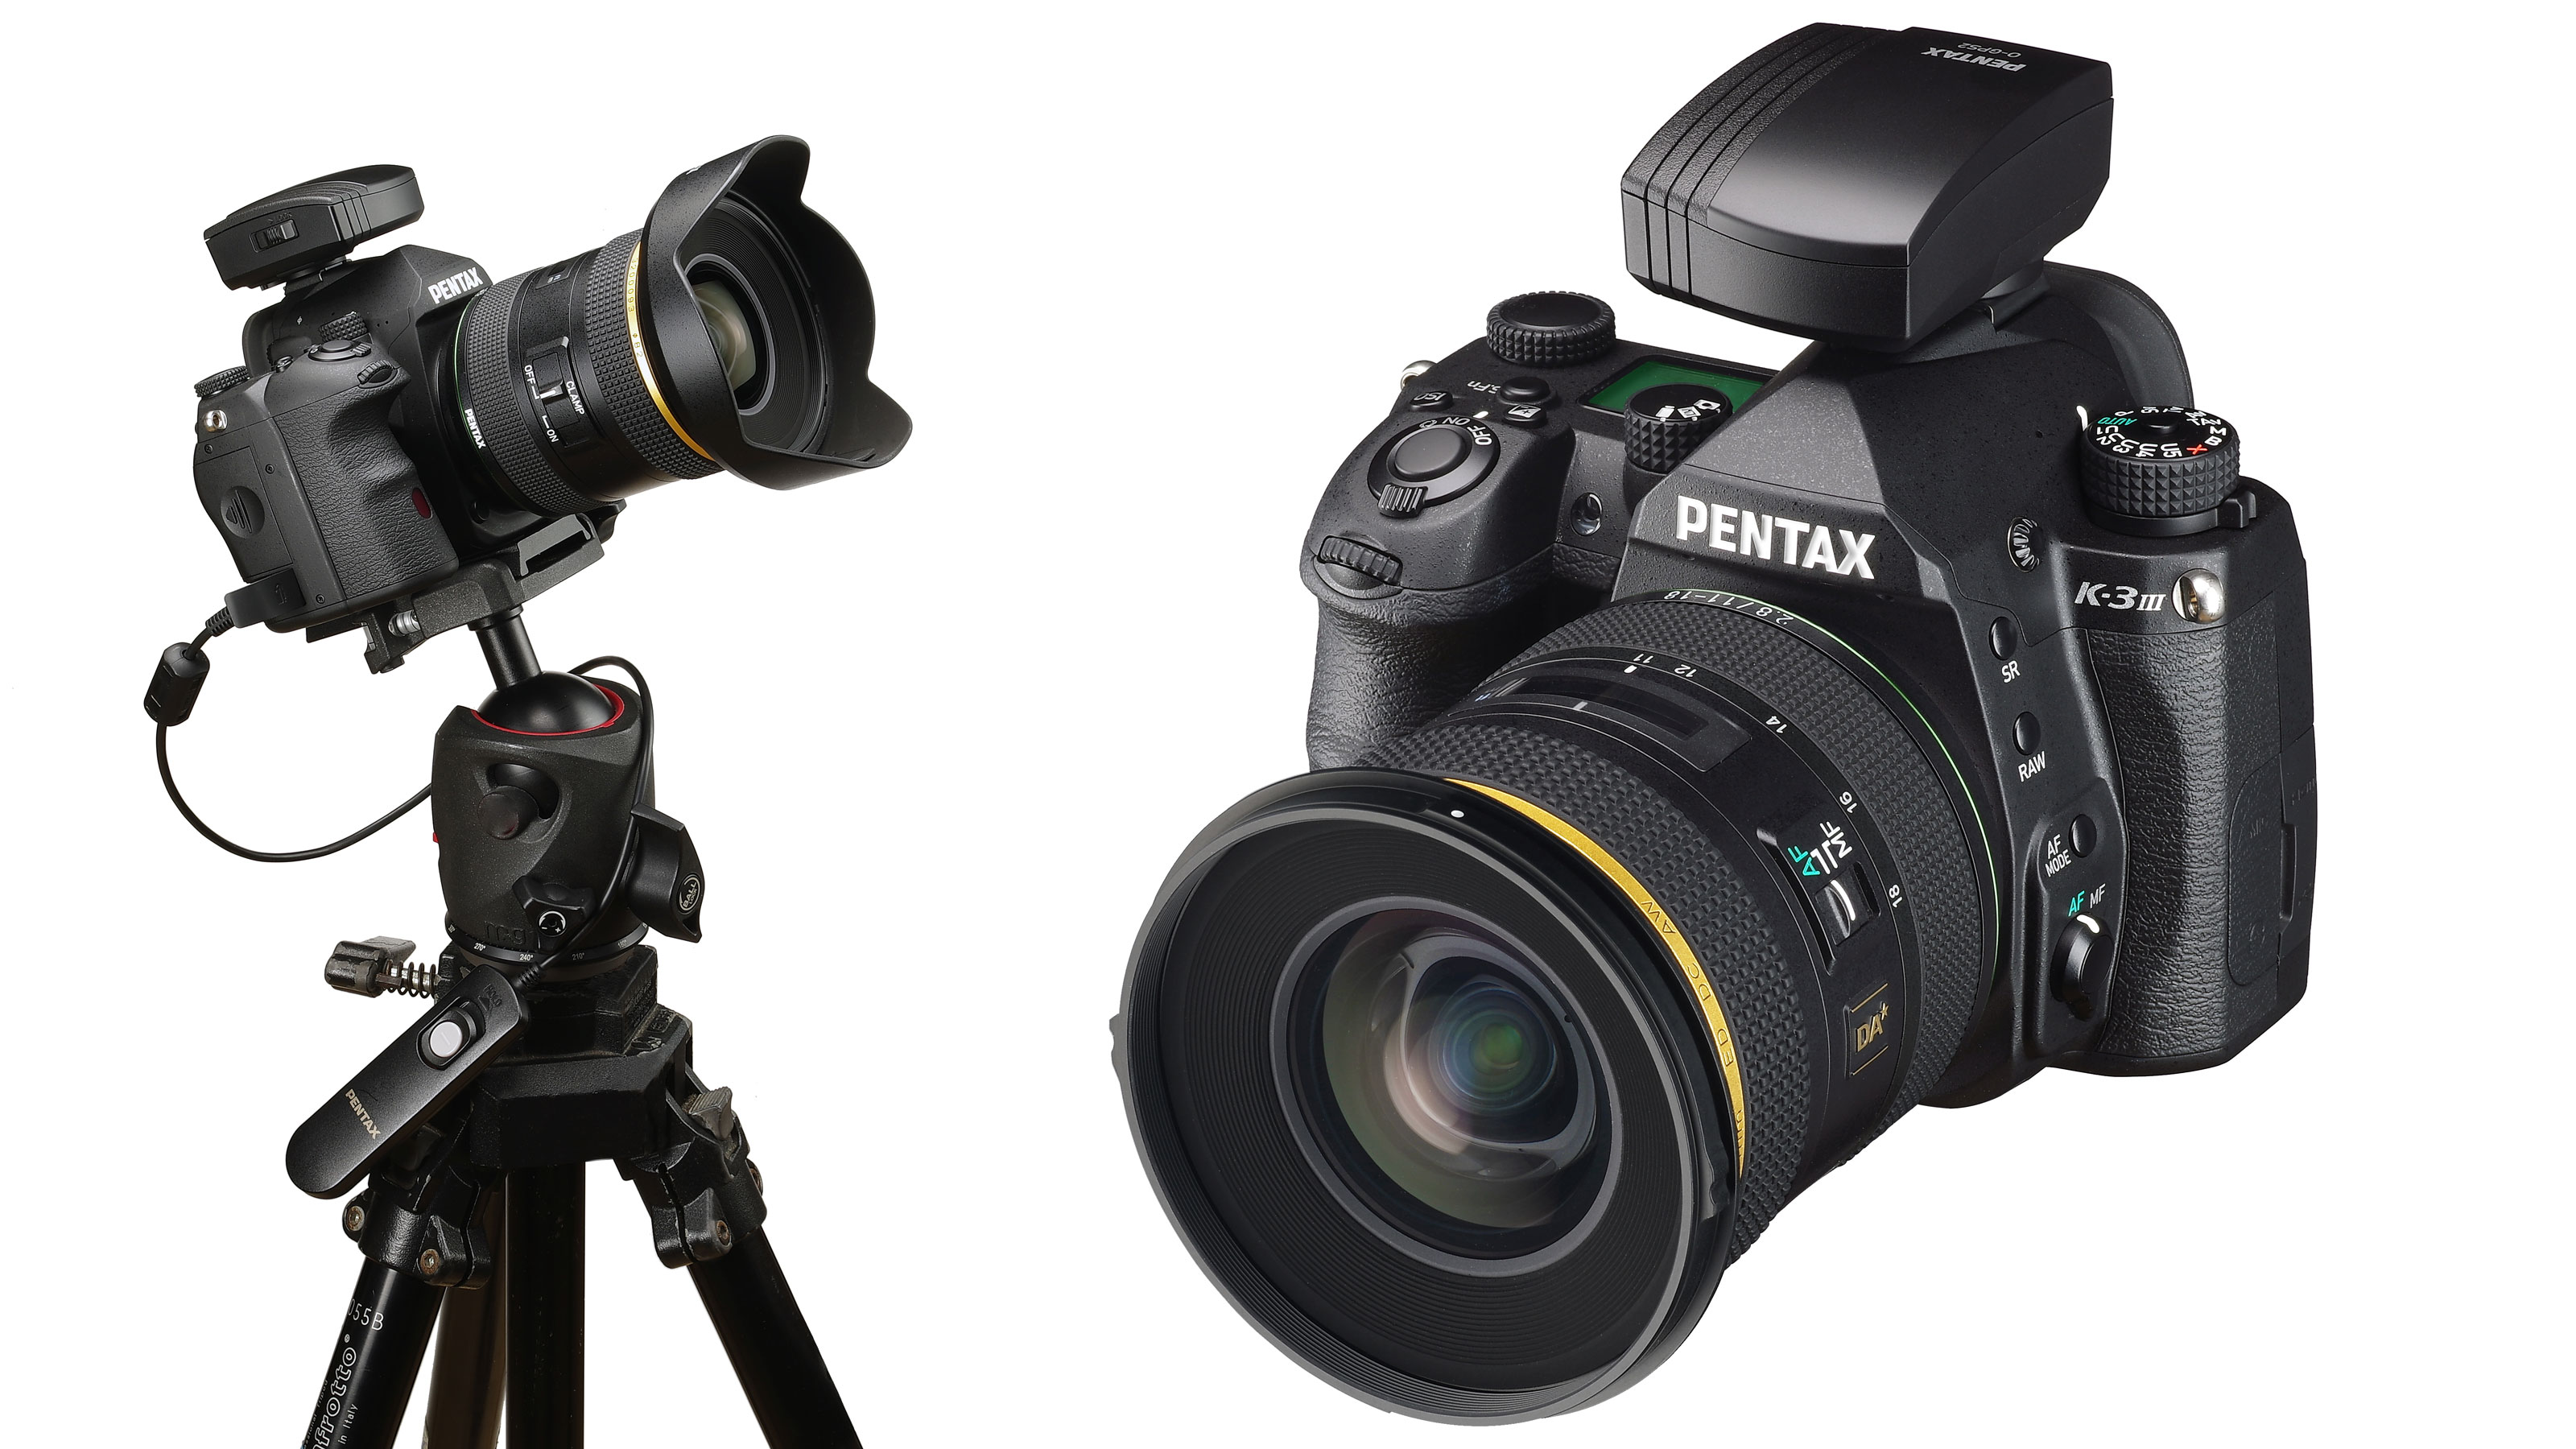 New Pentax O-GPS2 GPS unit will clip straight on to your Pentax